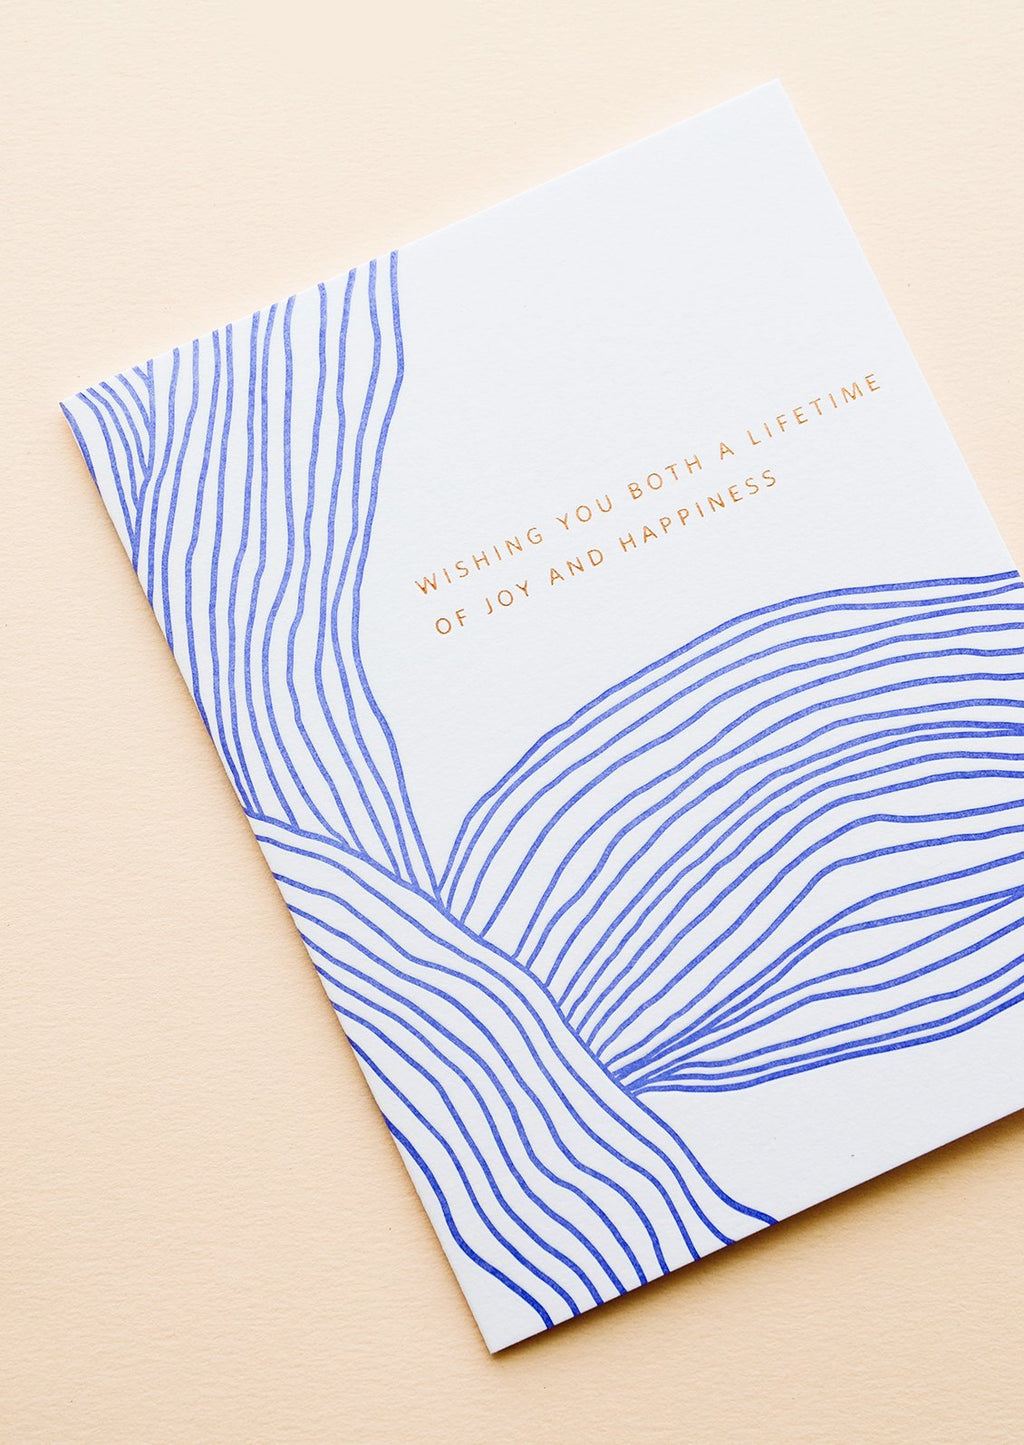 2: Greeting card with wavy cobalt blue line pattern and gold text reading "Wishing you both a lifetime of happiness"